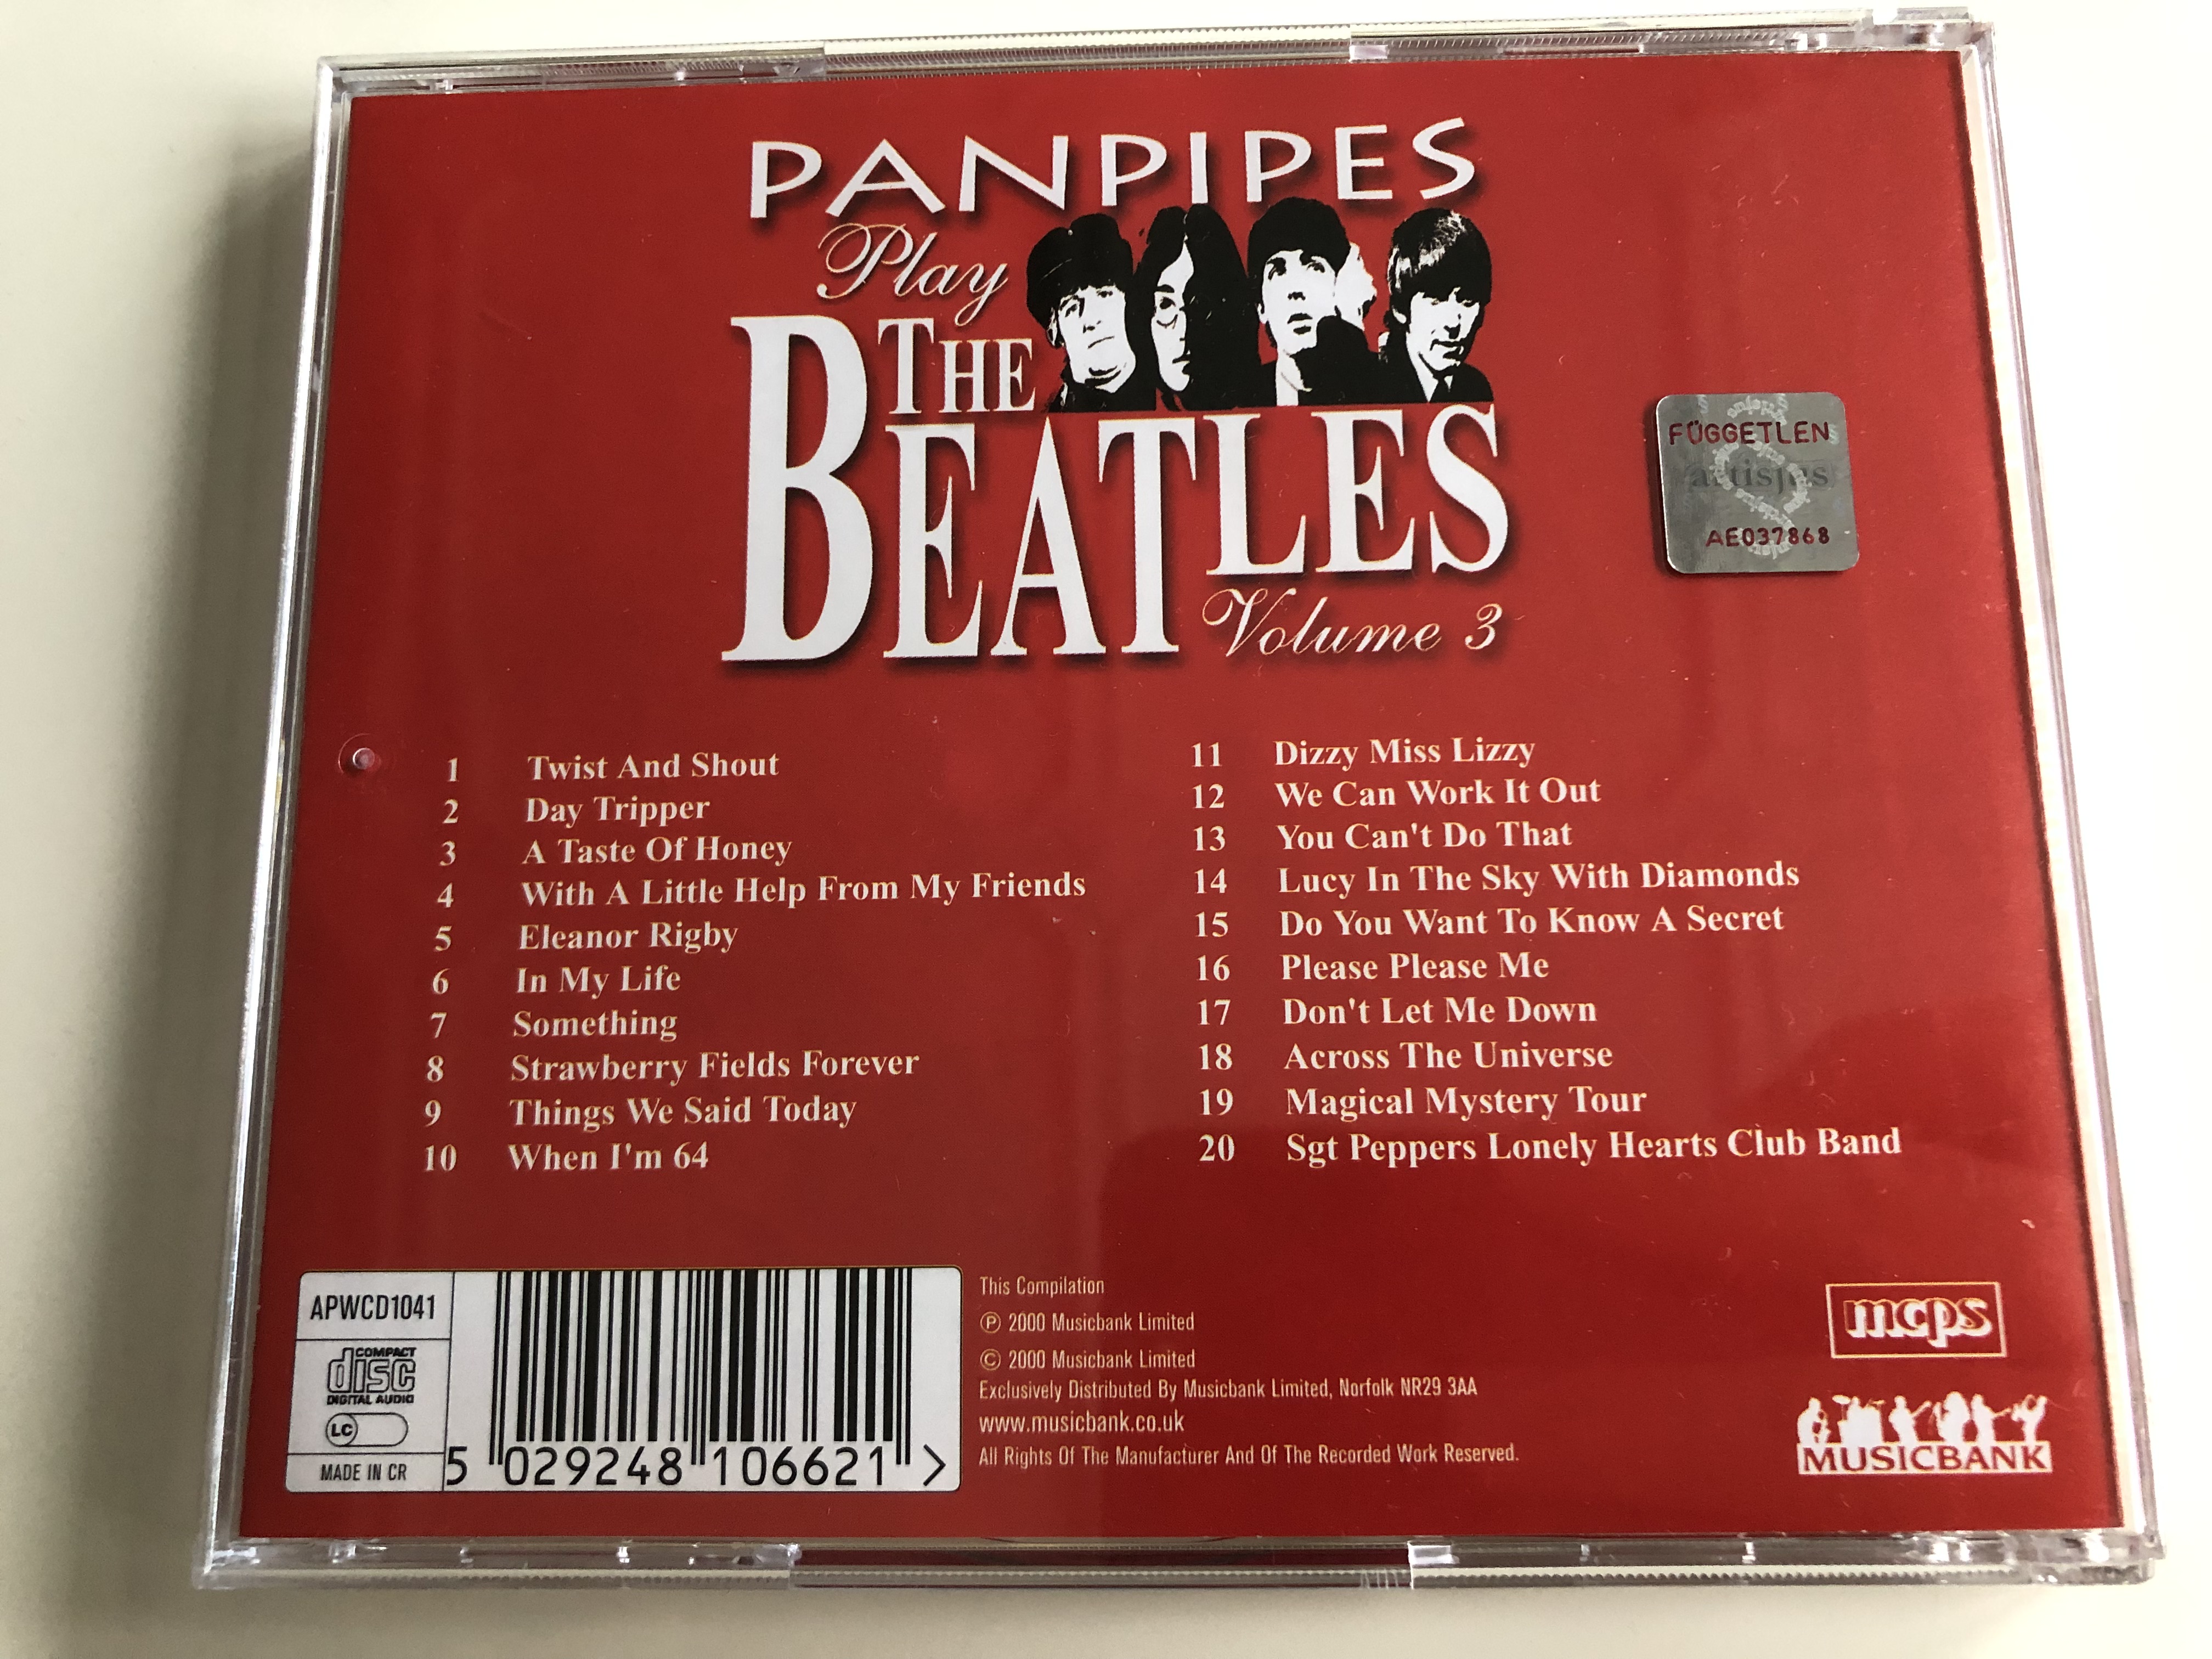 panpipes-play-the-beatles-vol.-3-includes-twist-shout-eleanor-rigby-please-please-me-something-we-can-work-it-out-audio-cd-2000-musicbank-apwcd1041-5-.jpg